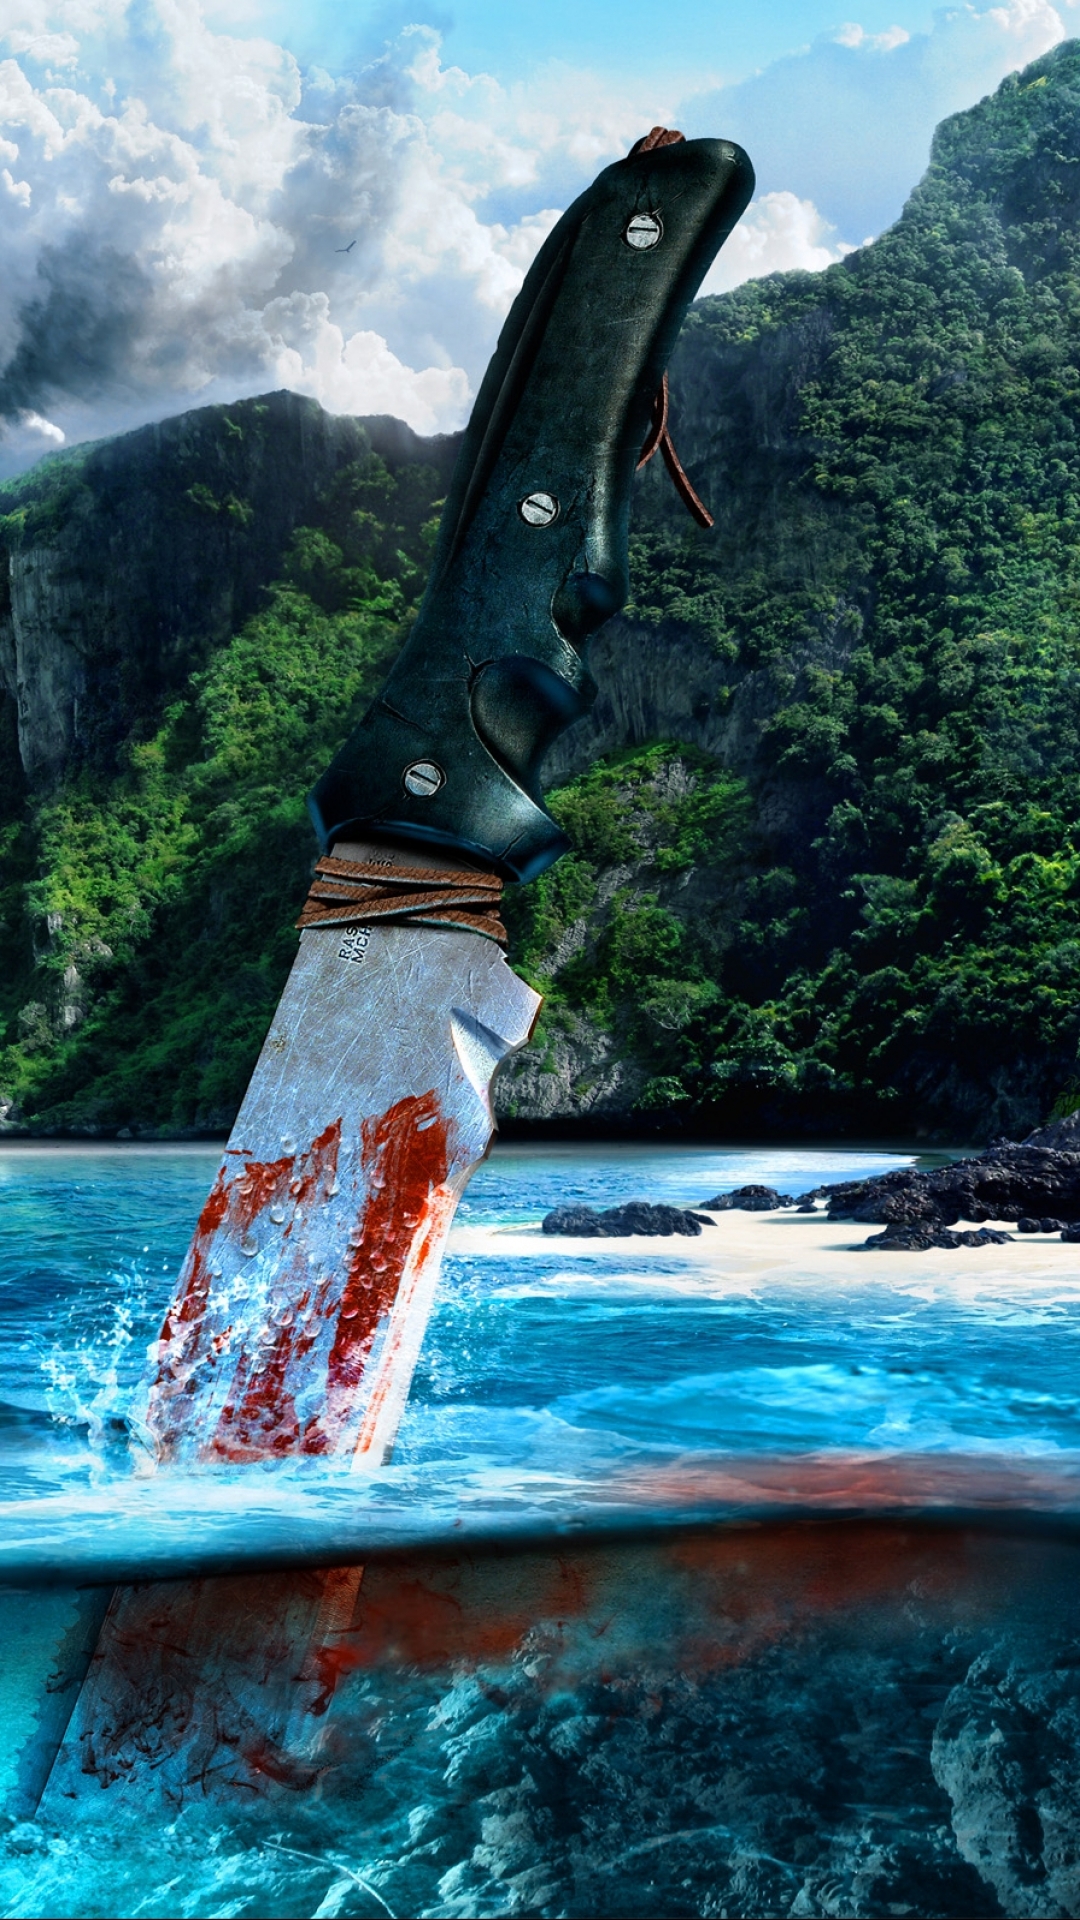  Far Cry 3 HQ Background Images